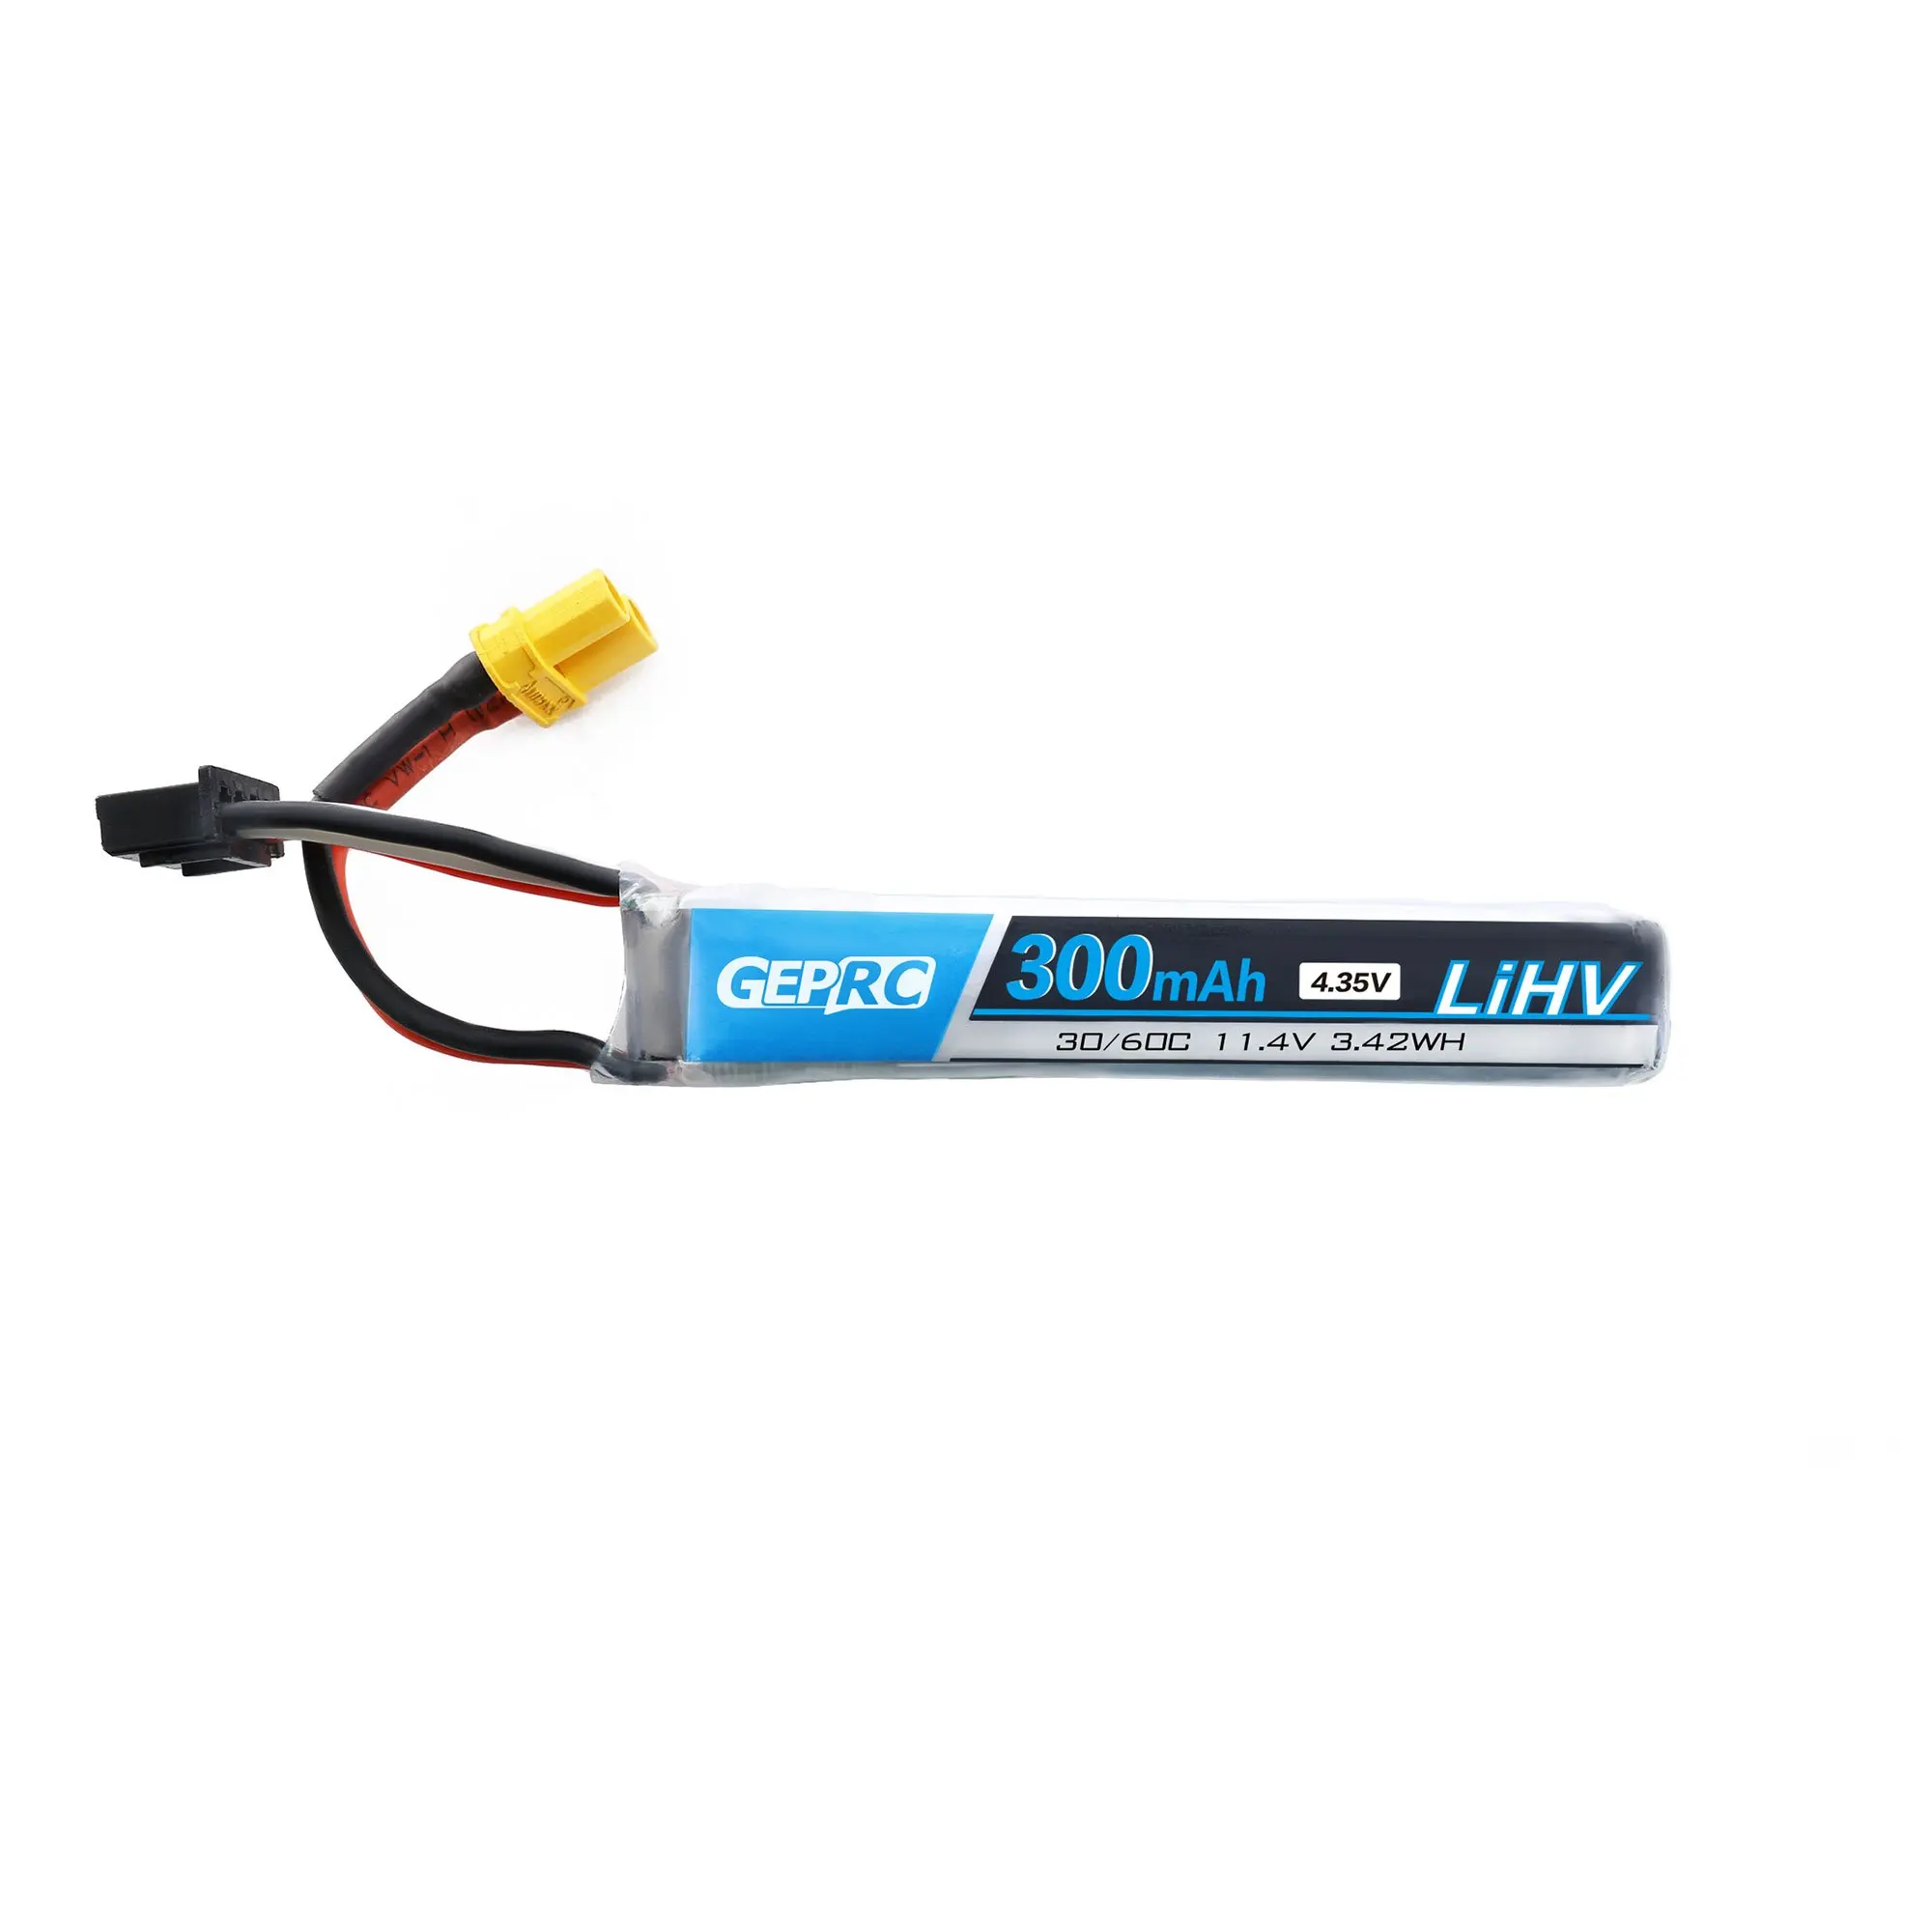 

GEPRC 3S 300mAh 11.4V 30C/60C Battery 11.4V 30C60C Whoop Battery For RC FPV Quadcopter Racing Freestyle Cinewhoop Drone